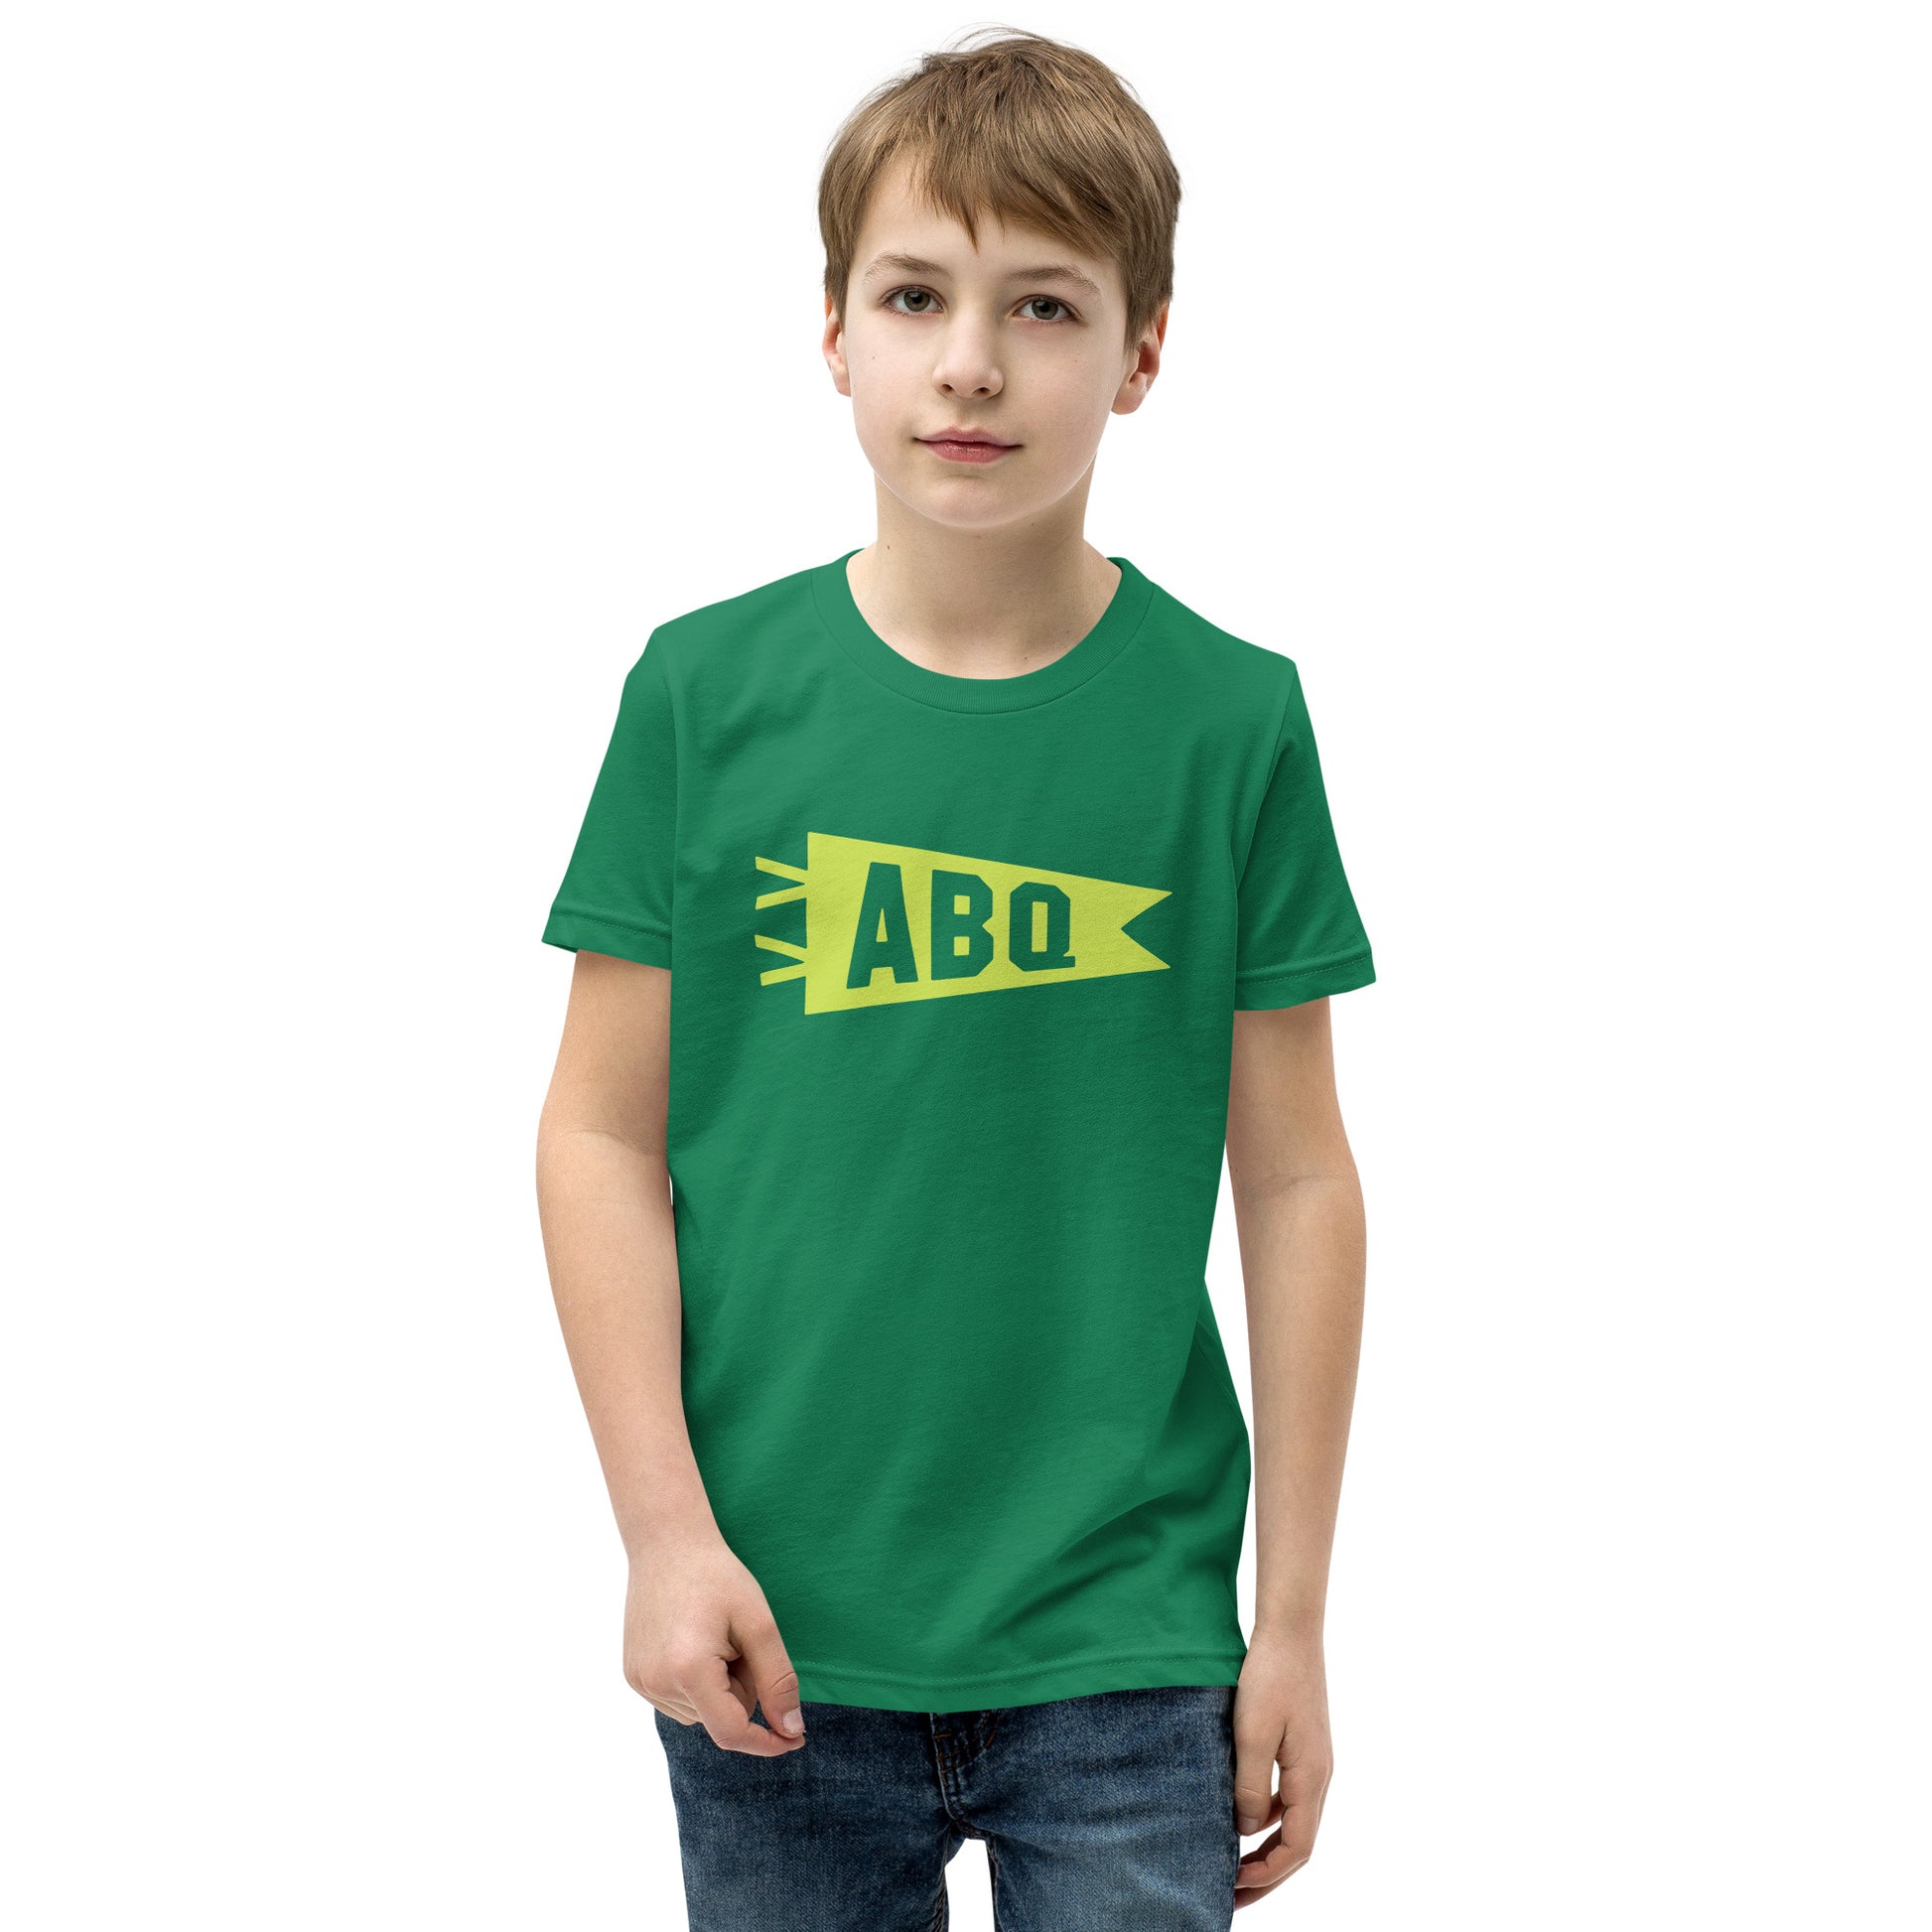 Kid's Airport Code Tee - Green Graphic • ABQ Albuquerque • YHM Designs - Image 08